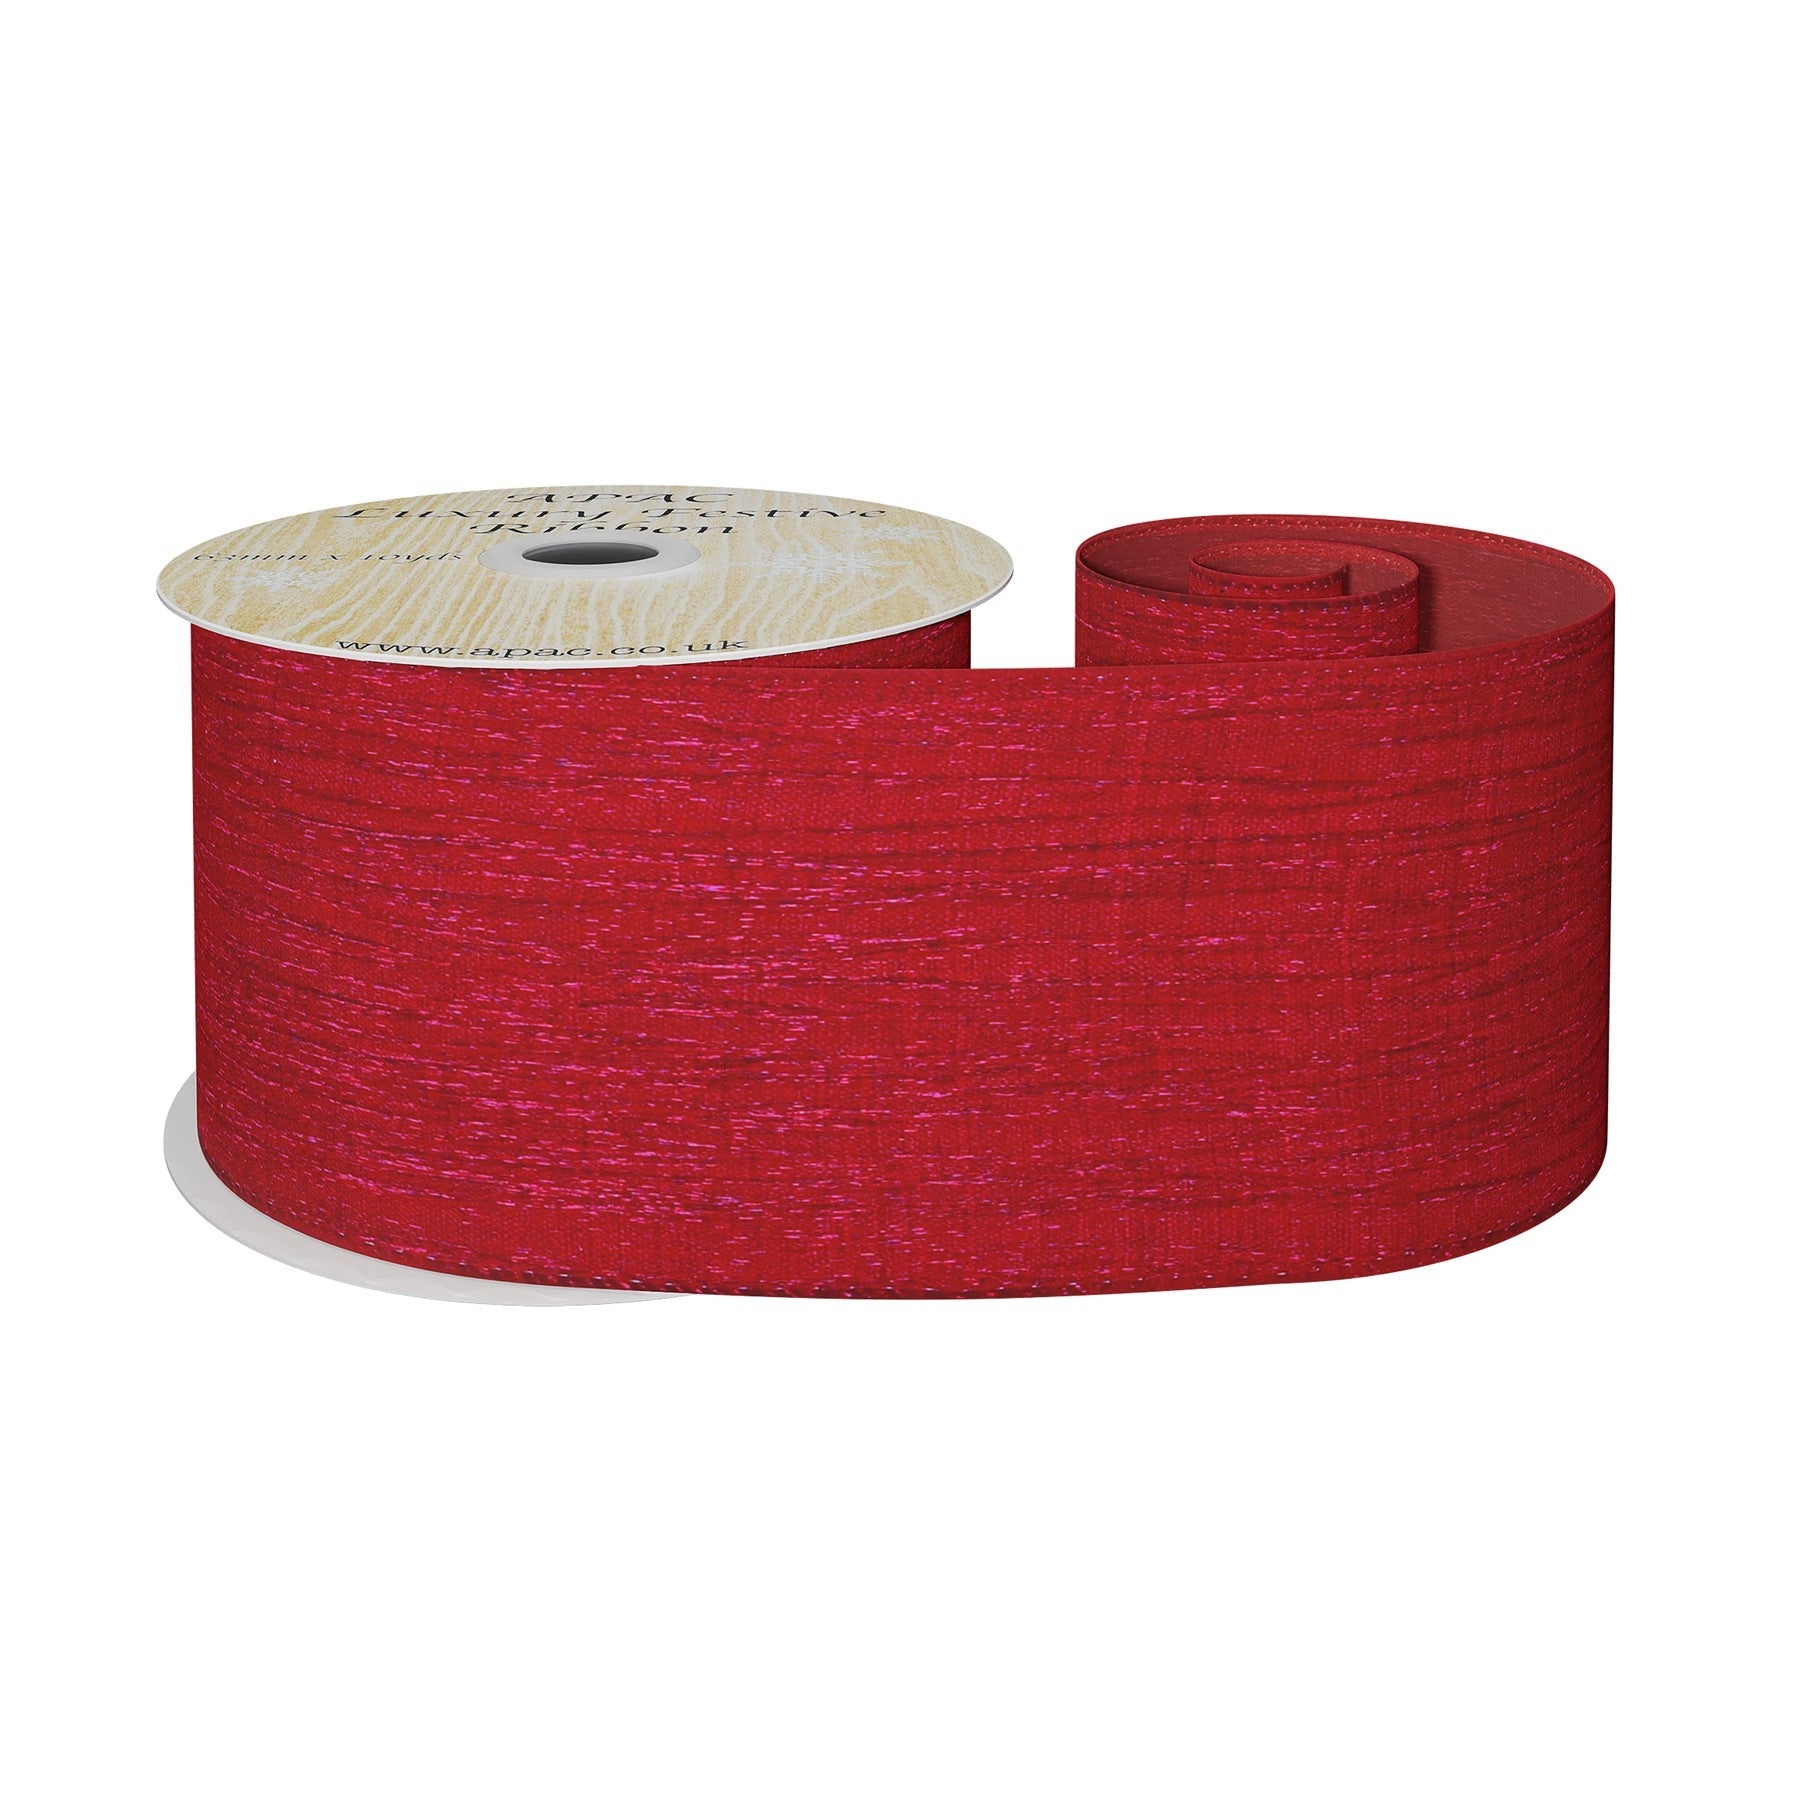 View Red Crinkle Ribbon 63mm x 10yds information